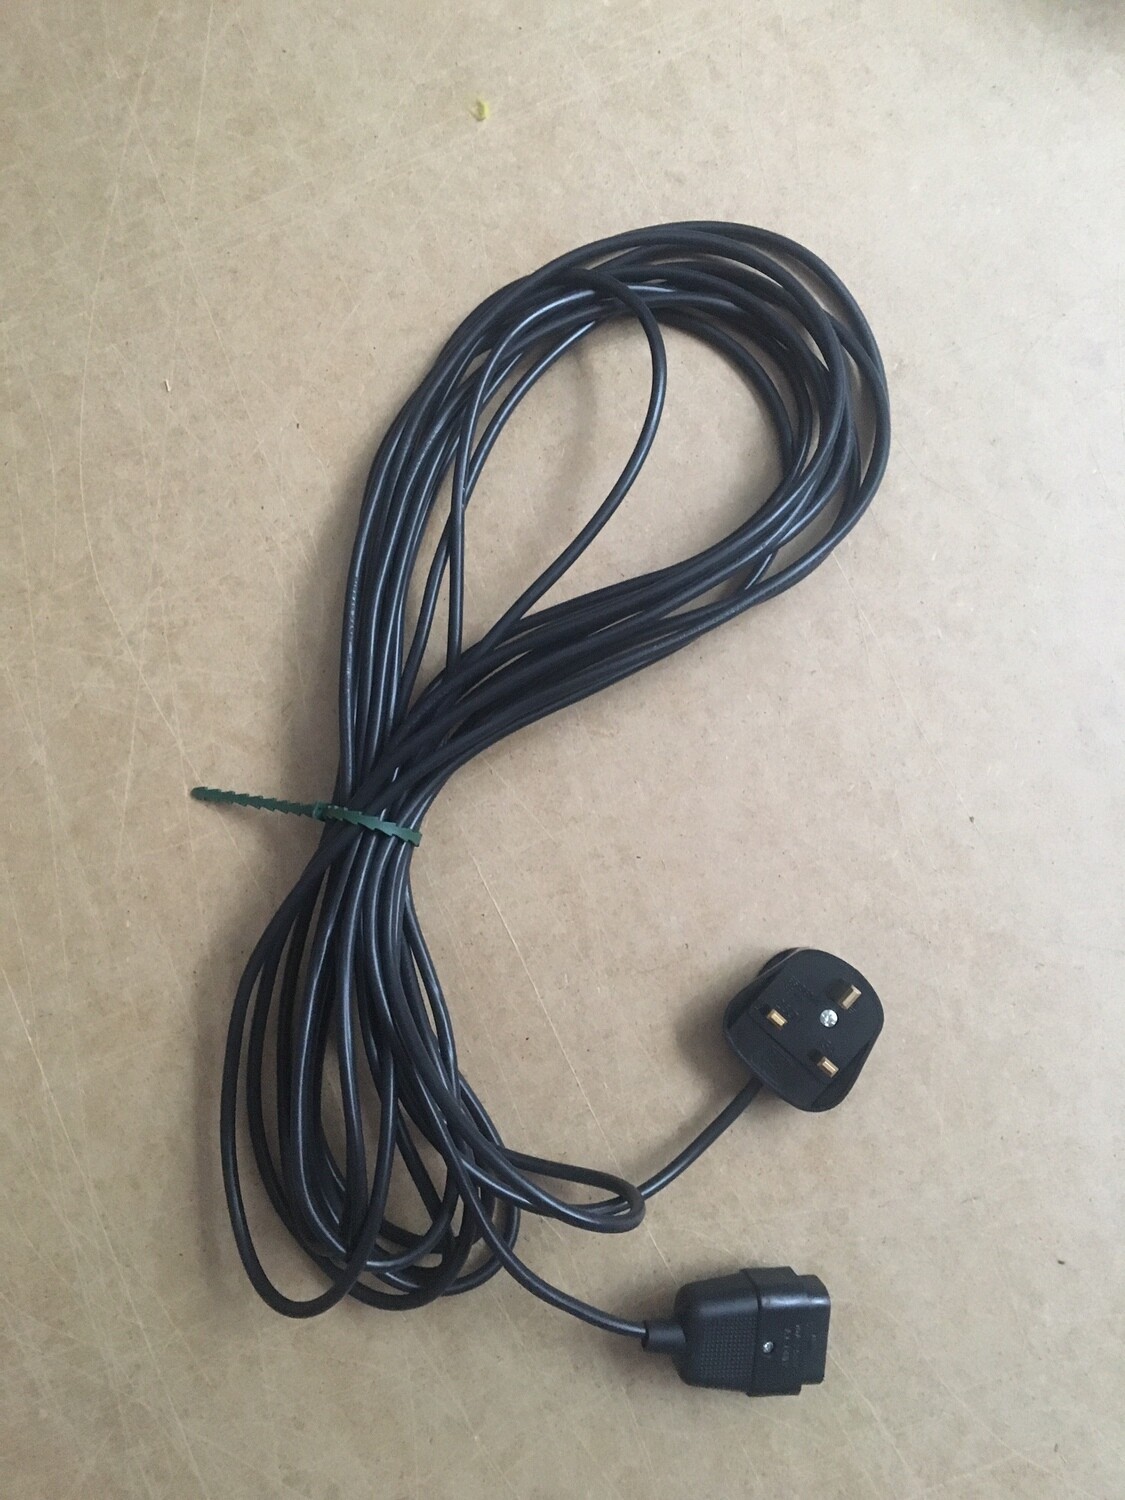 10m/33ft Power cable with 2 pin break connector and Domestic 5amp Plug